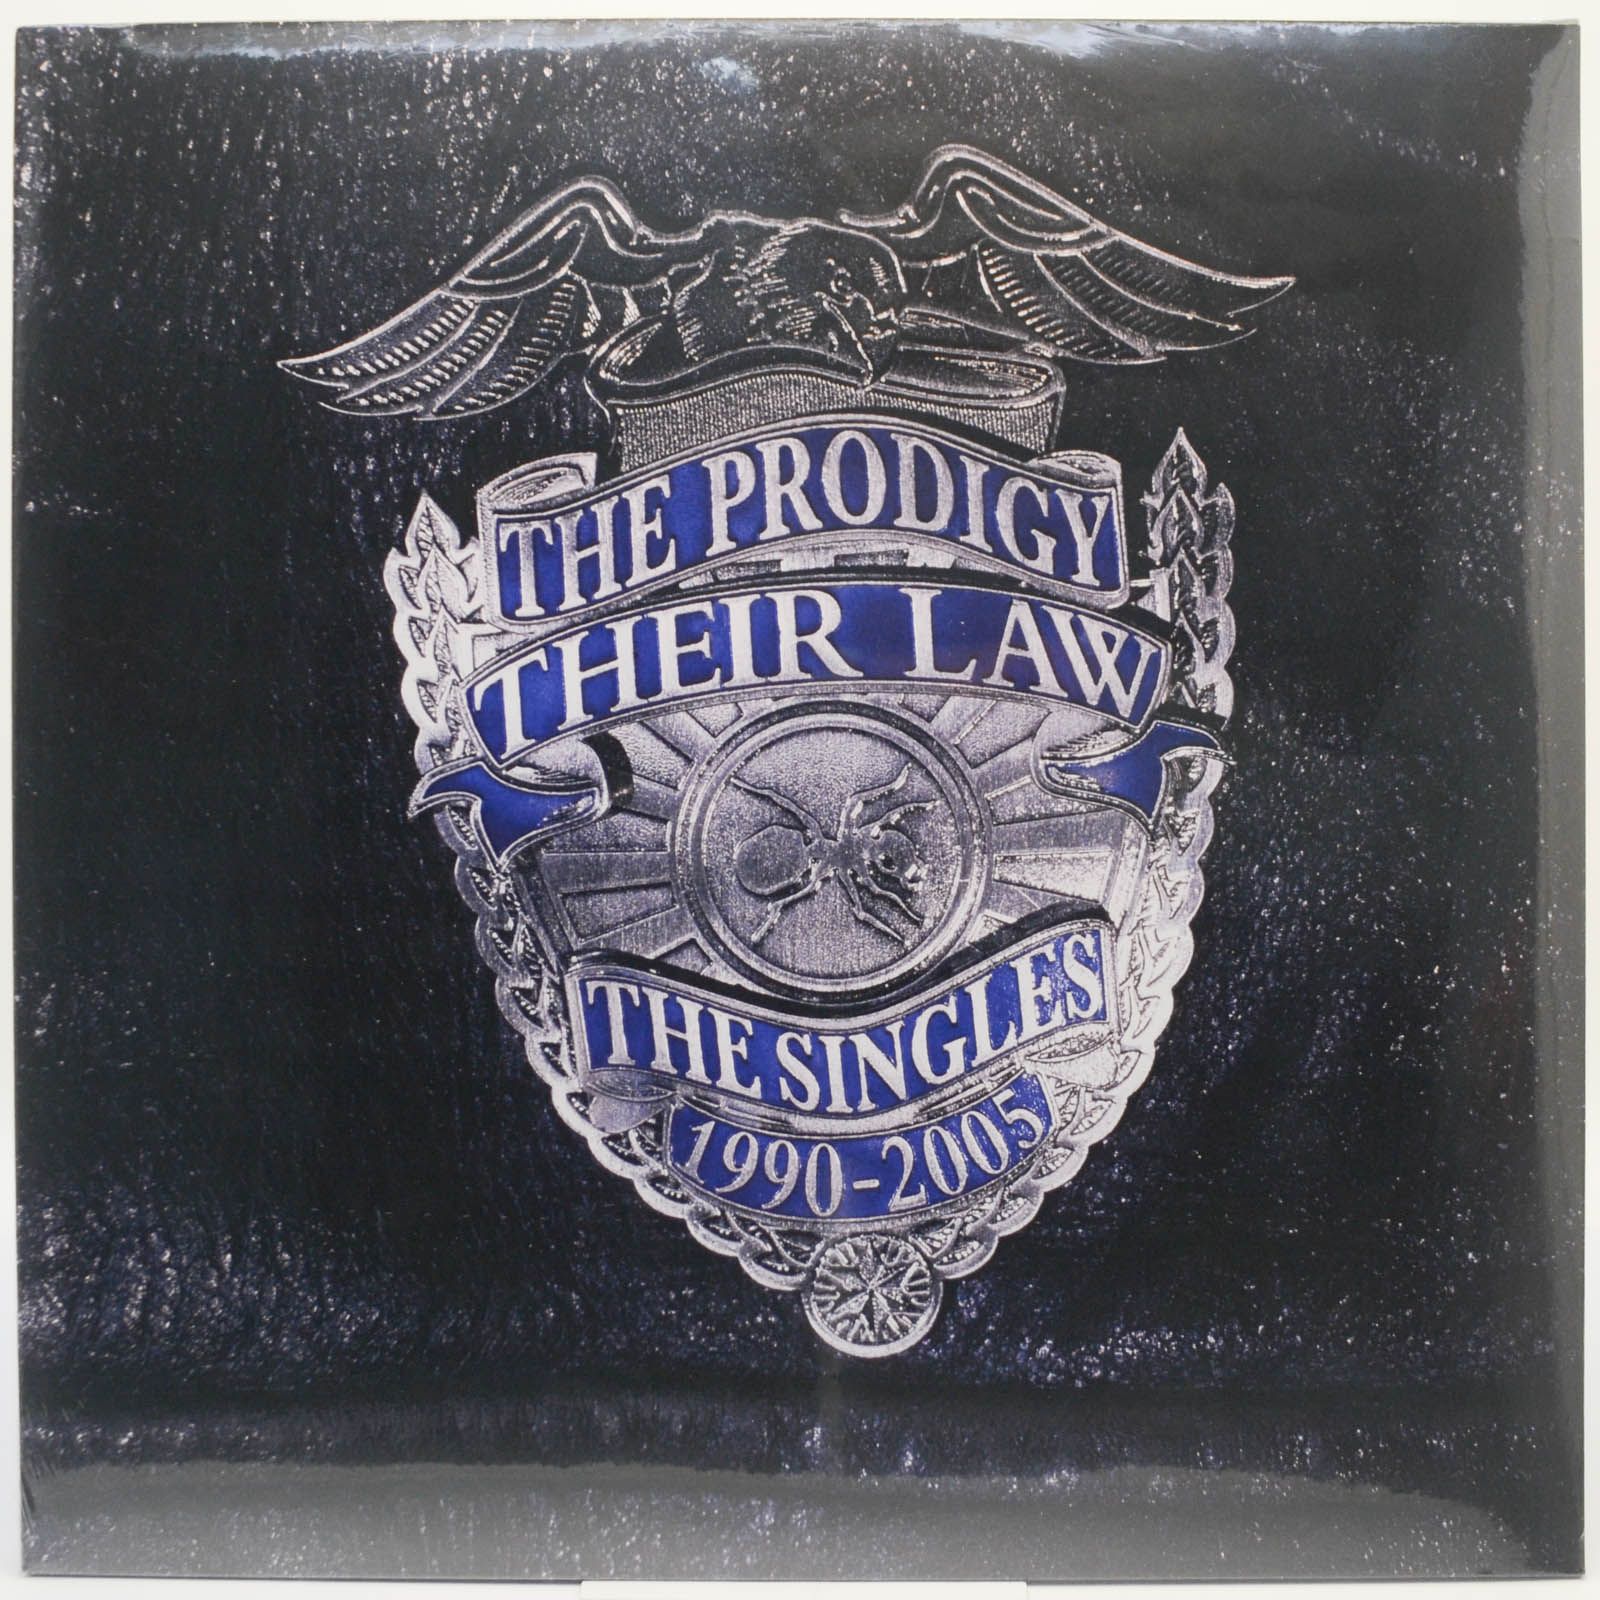 Prodigy — Their Law - The Singles 1990-2005 (2LP), 2005